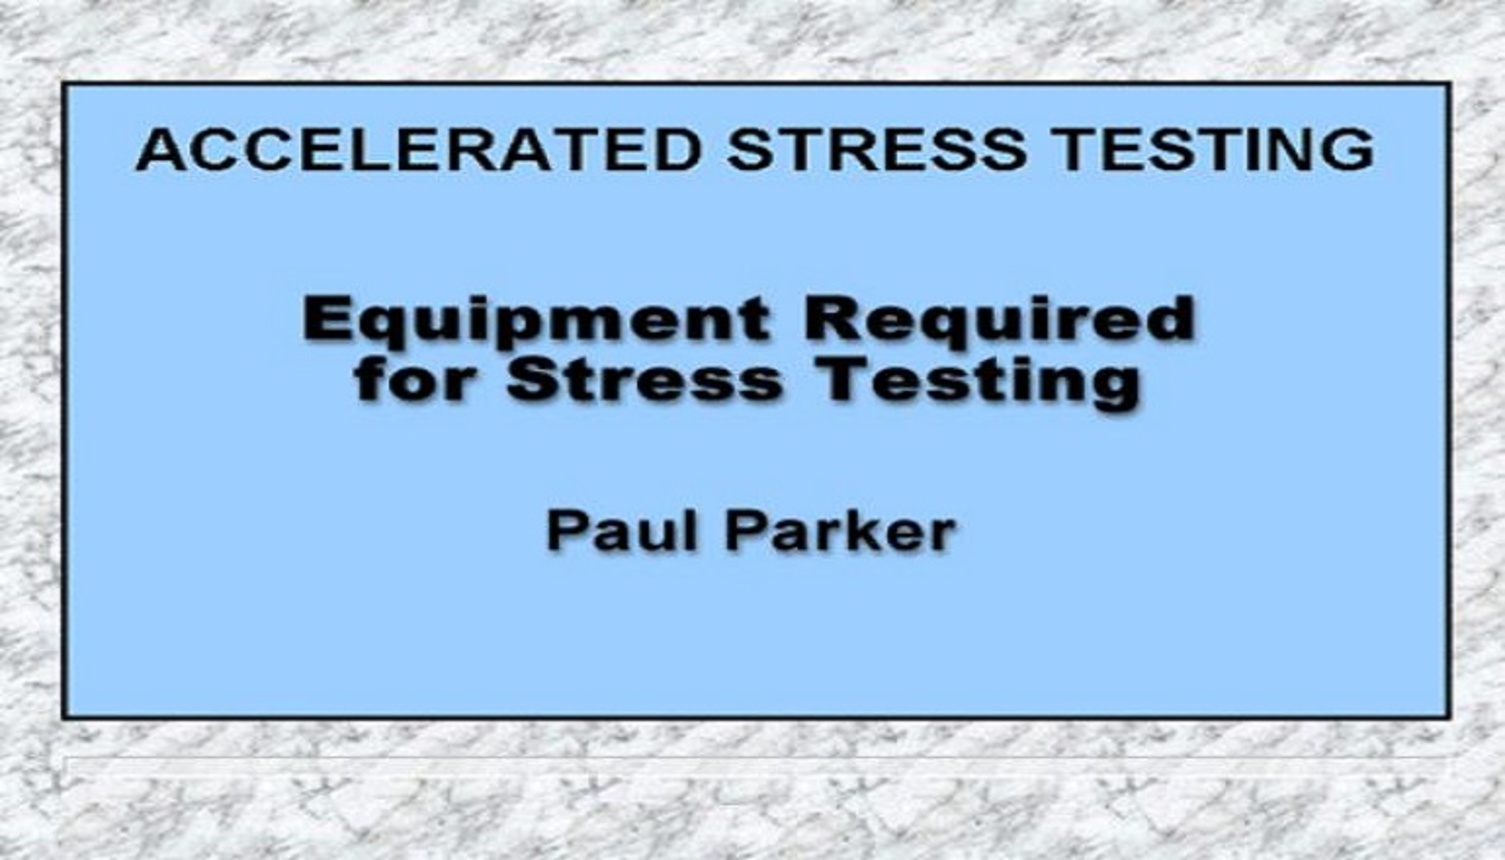 Equipment Required for Stress Testing